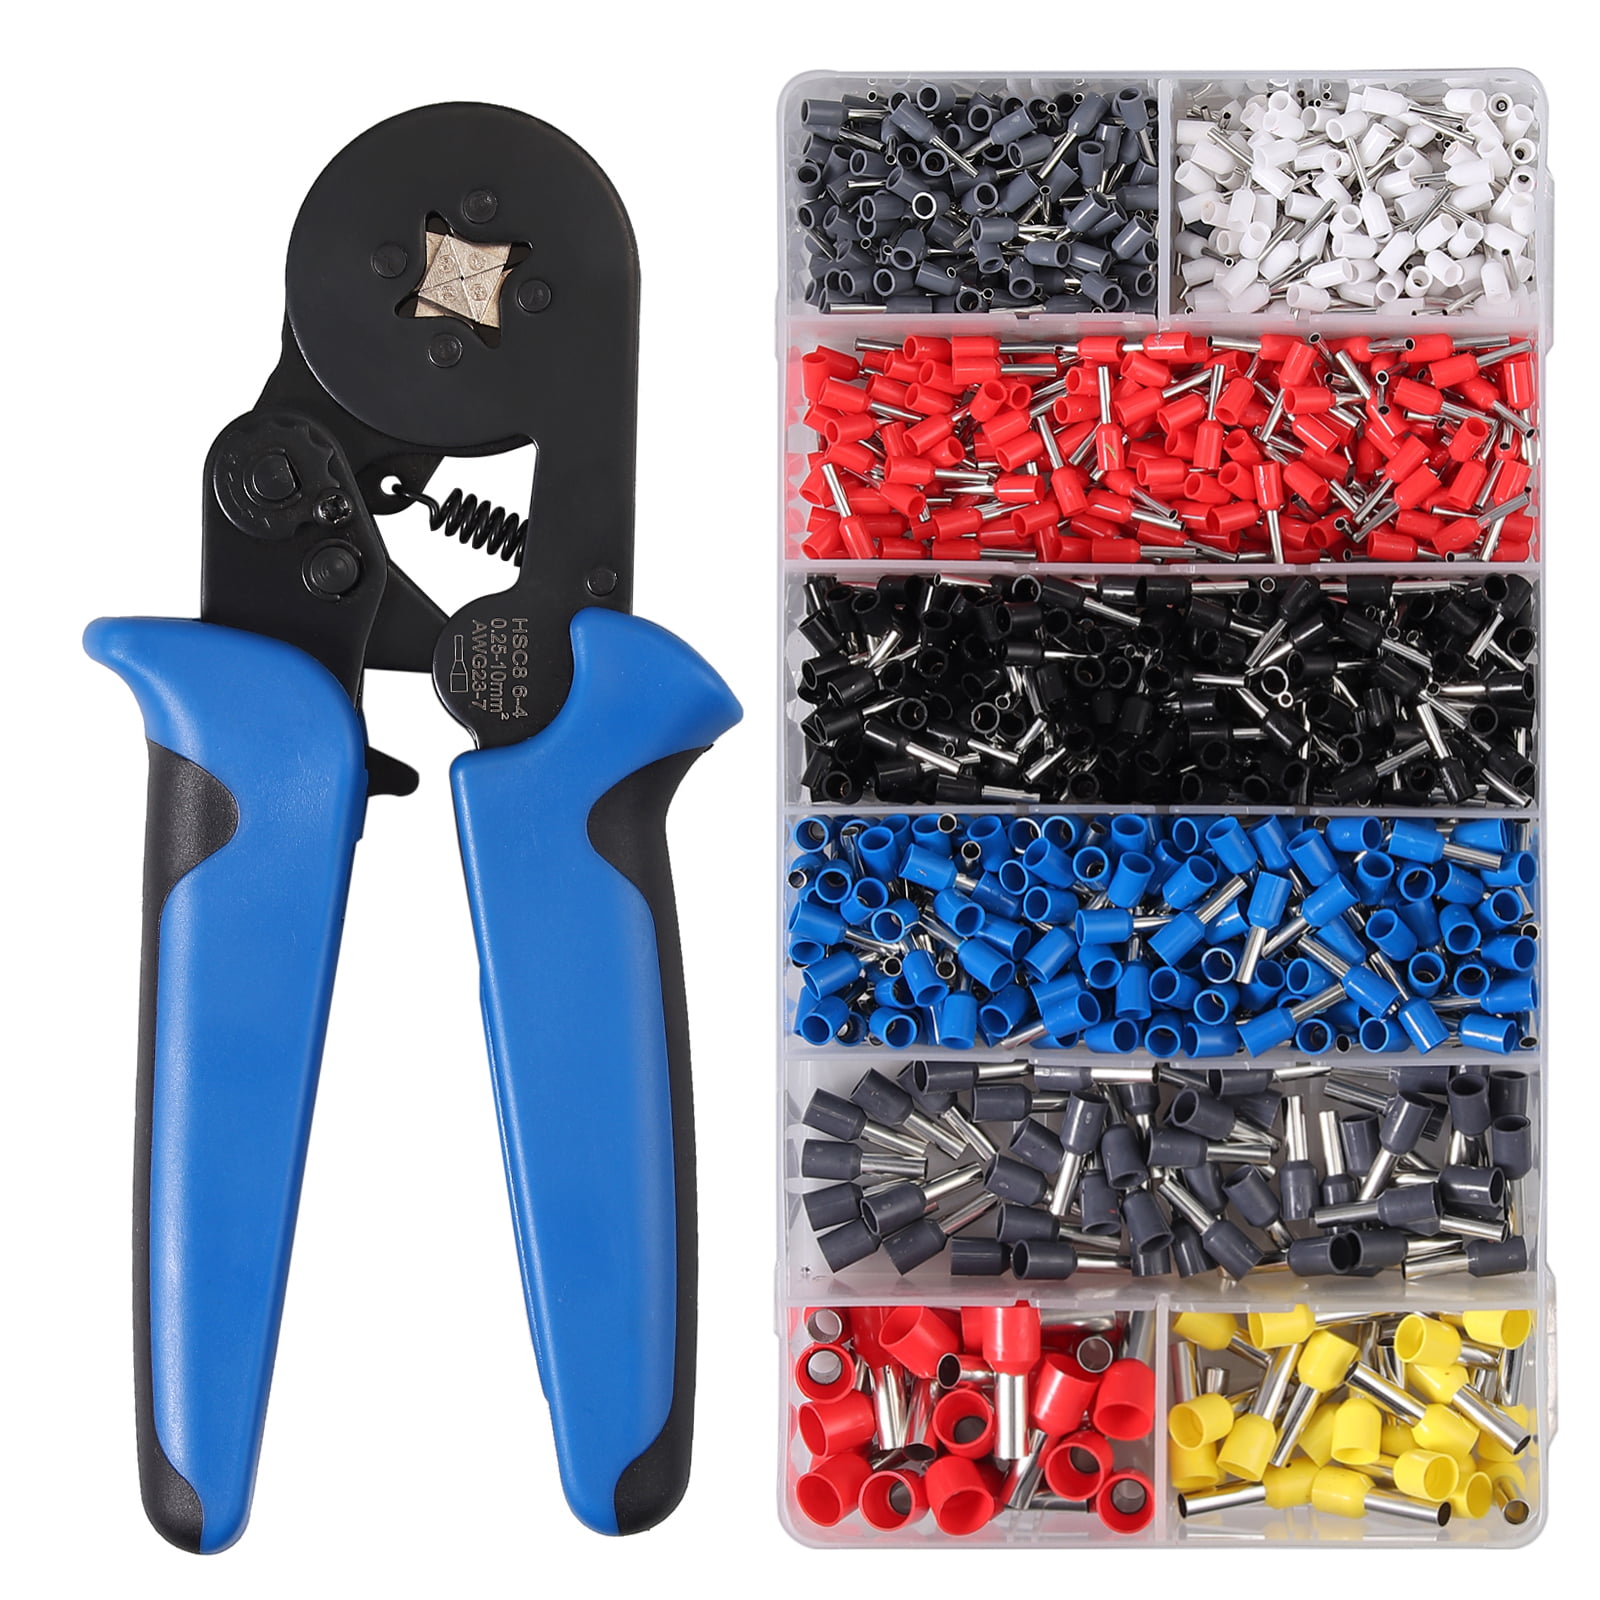 Insulated Cable Connector Terminal Ratchet Crimping Wire Crimper Plier Tool Kit 